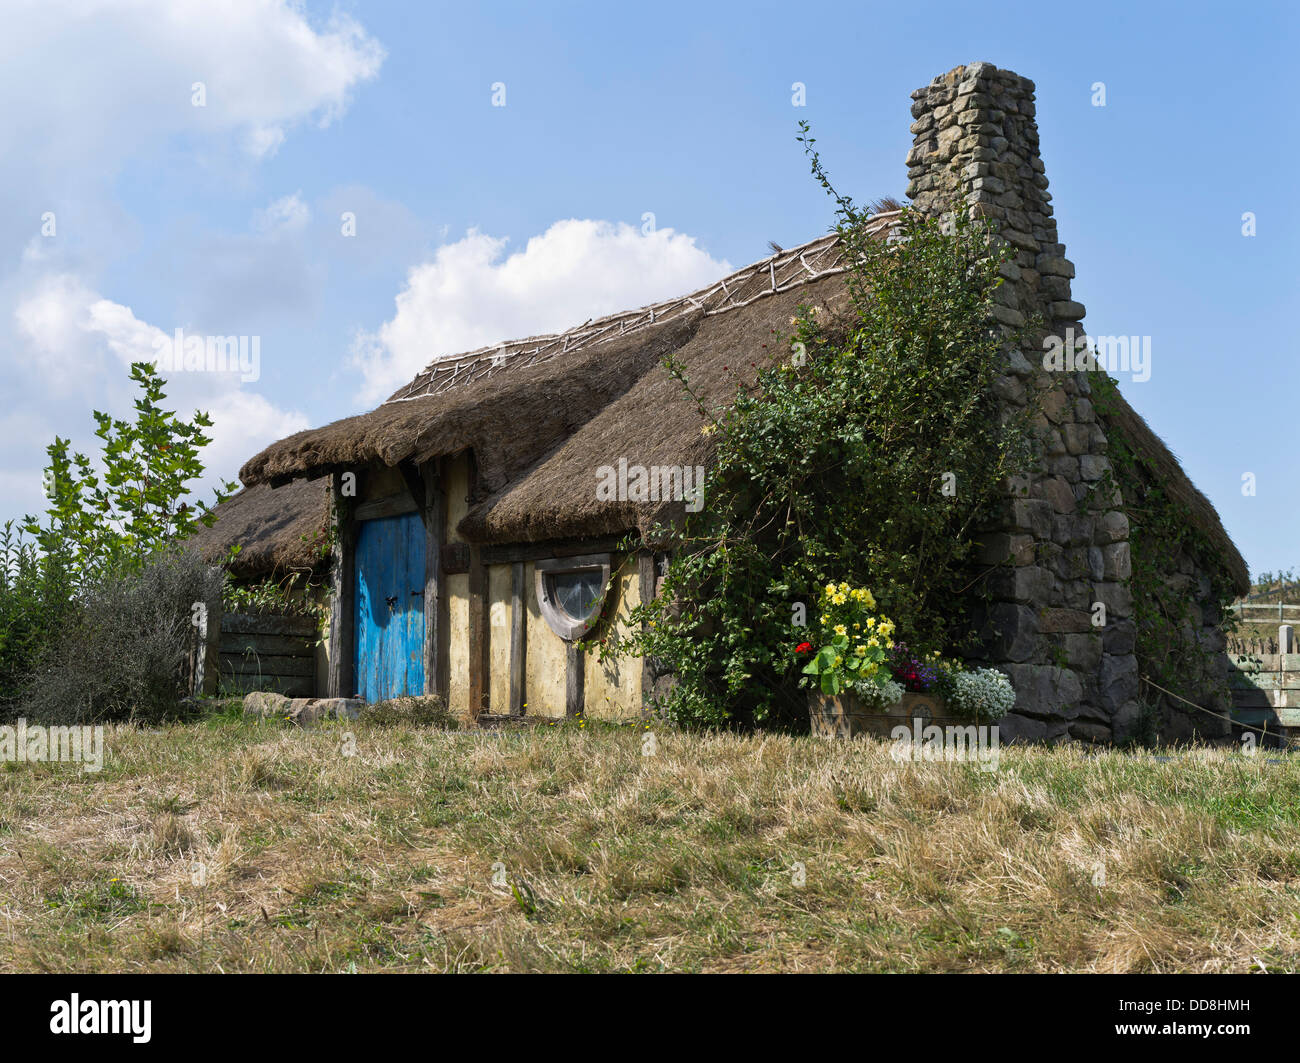 dh  HOBBITON NEW ZEALAND Hobbits cottages film set movie site Lord of the Rings films Stock Photo